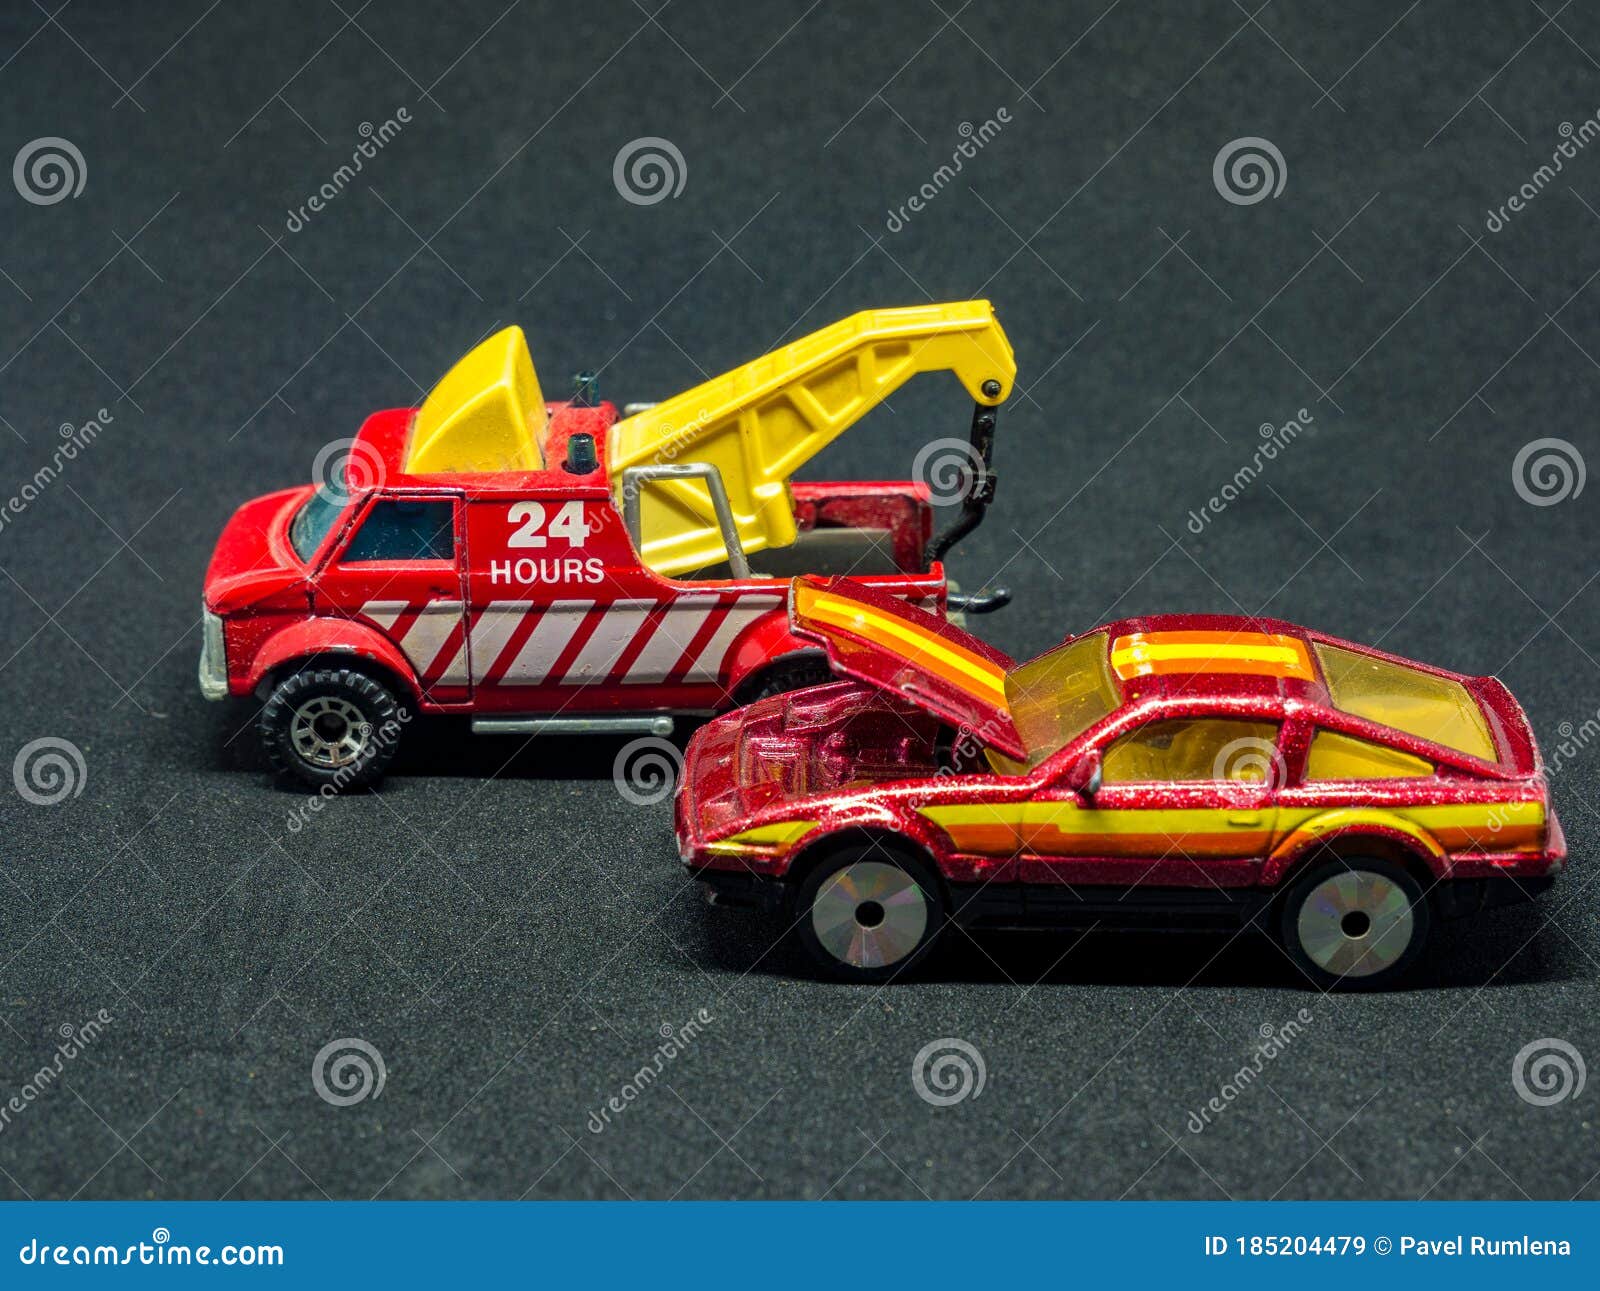 https://thumbs.dreamstime.com/z/usti-nad-labem-czech-republic-toy-cars-tow-truck-hook-car-open-engine-cover-185204479.jpg